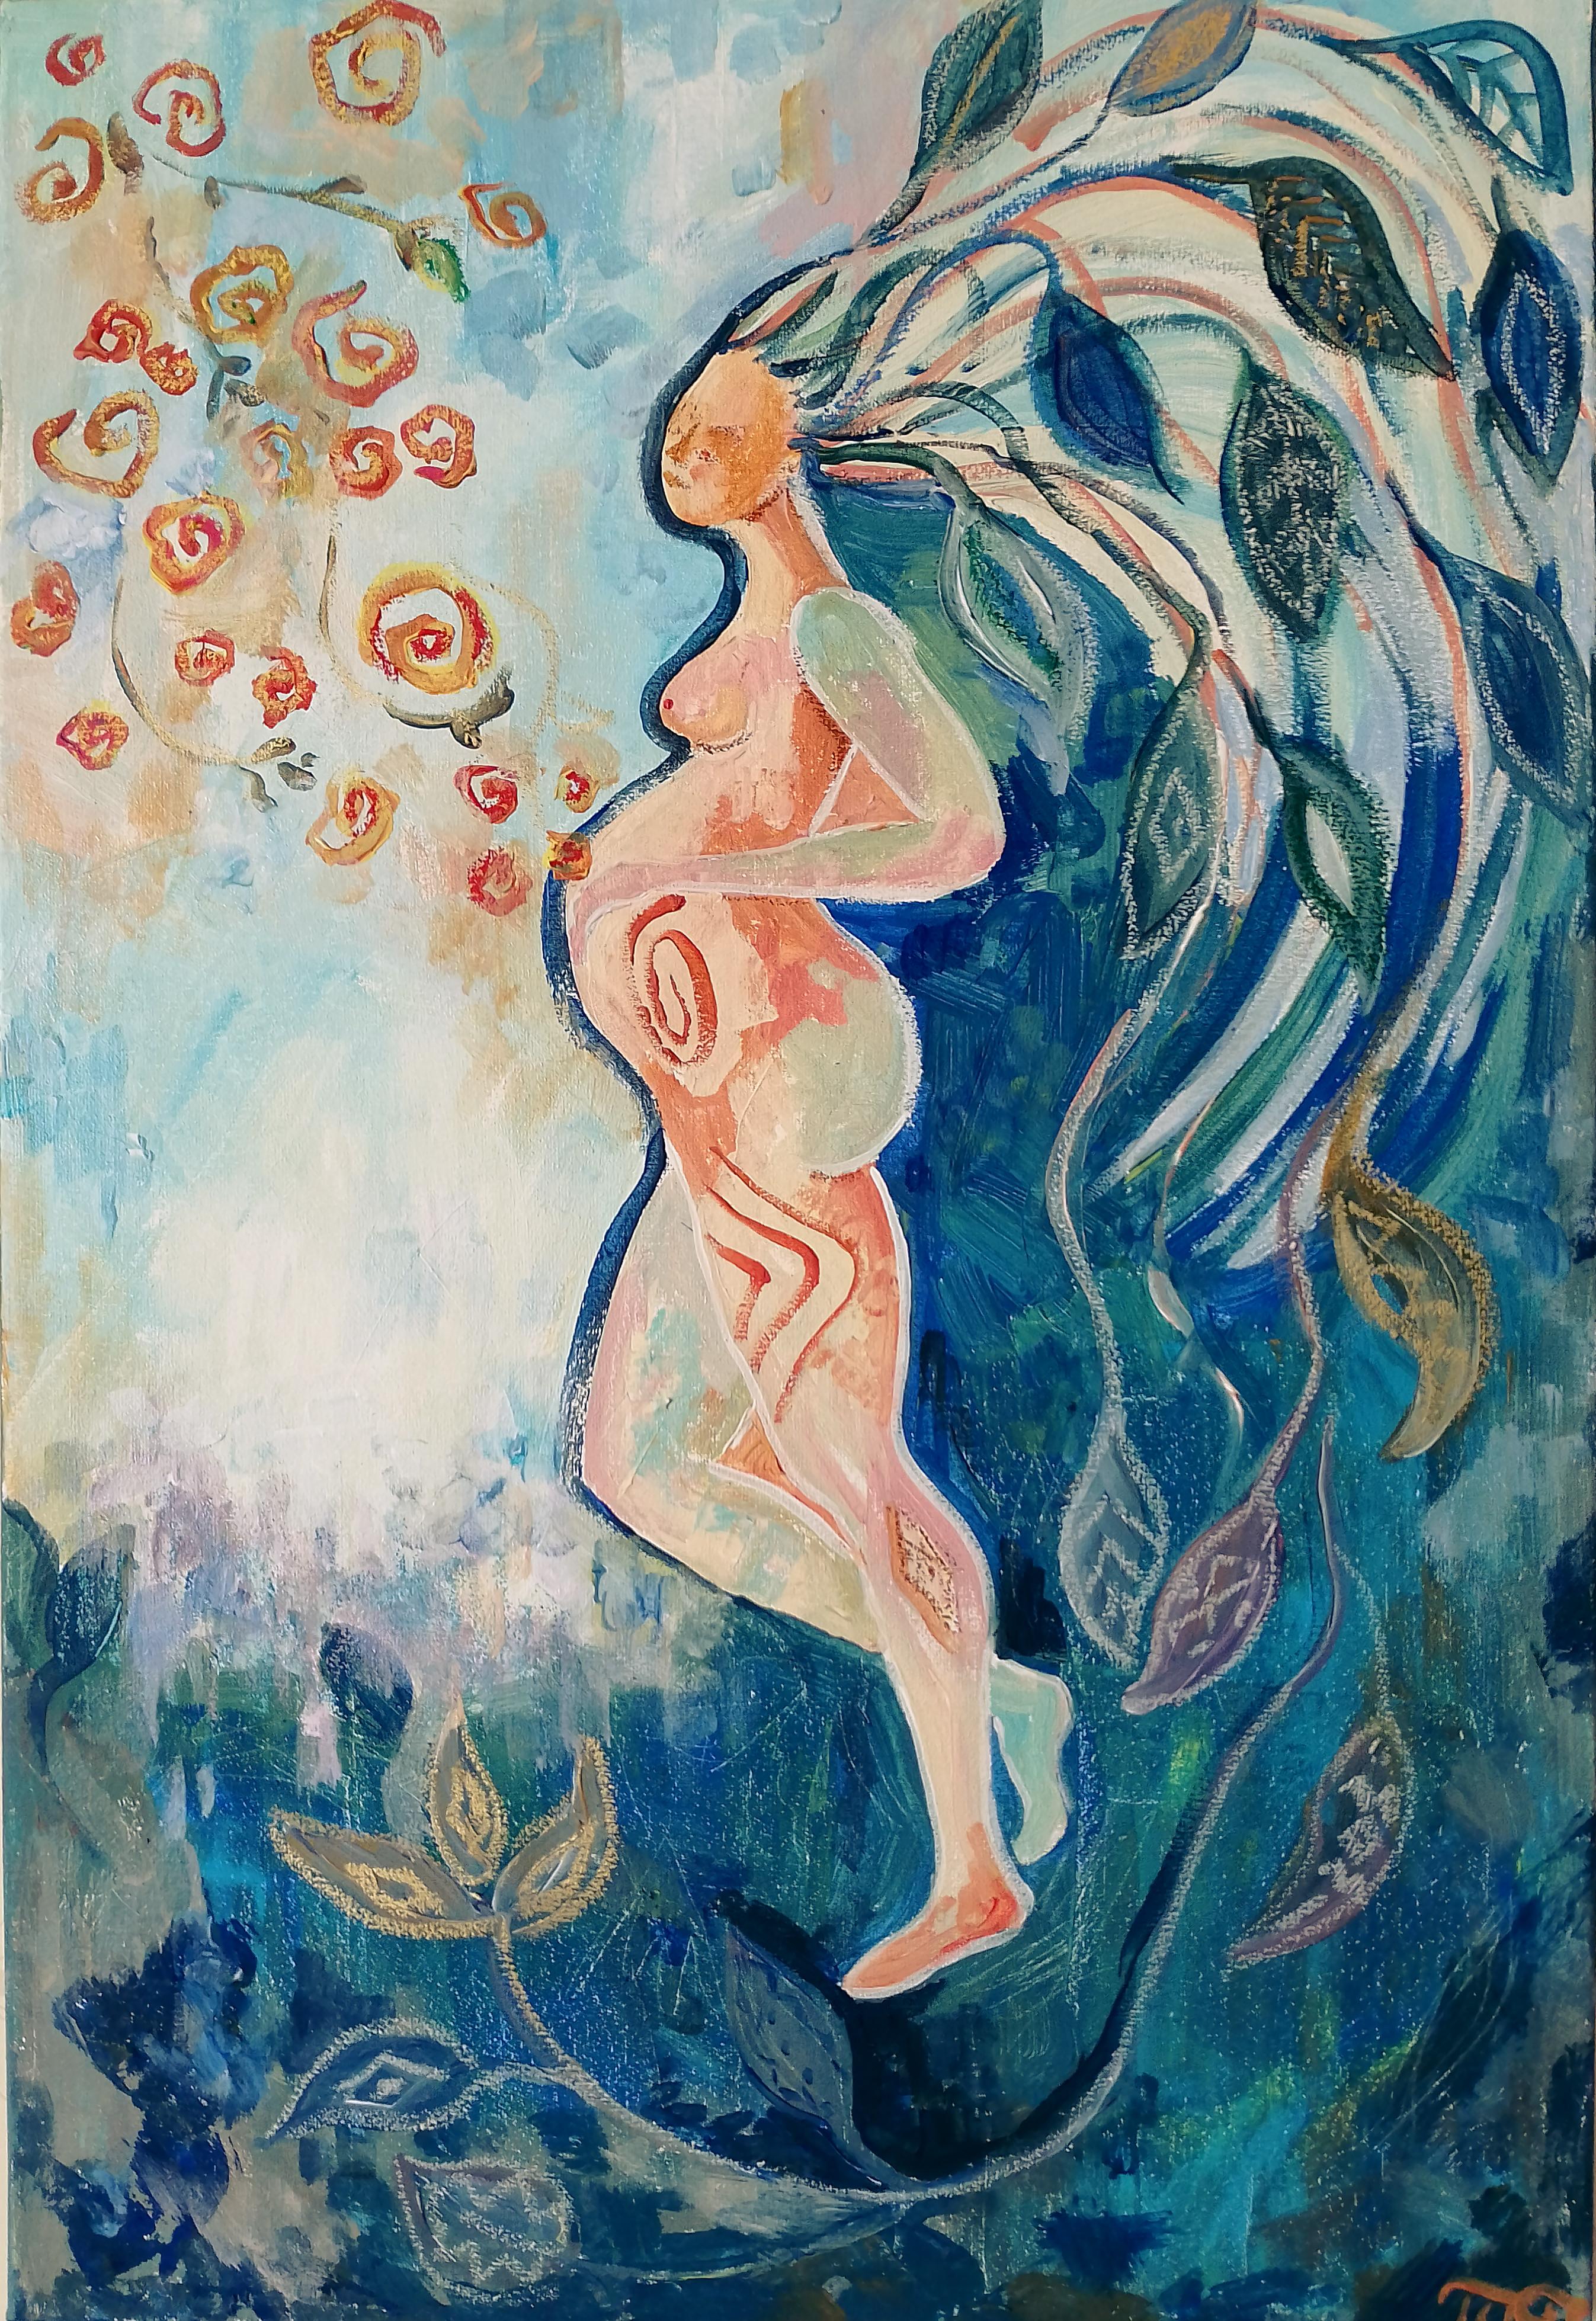 The Cycle of Being: Motherhood Through the Ages painting by Tetiana Pchelnykova